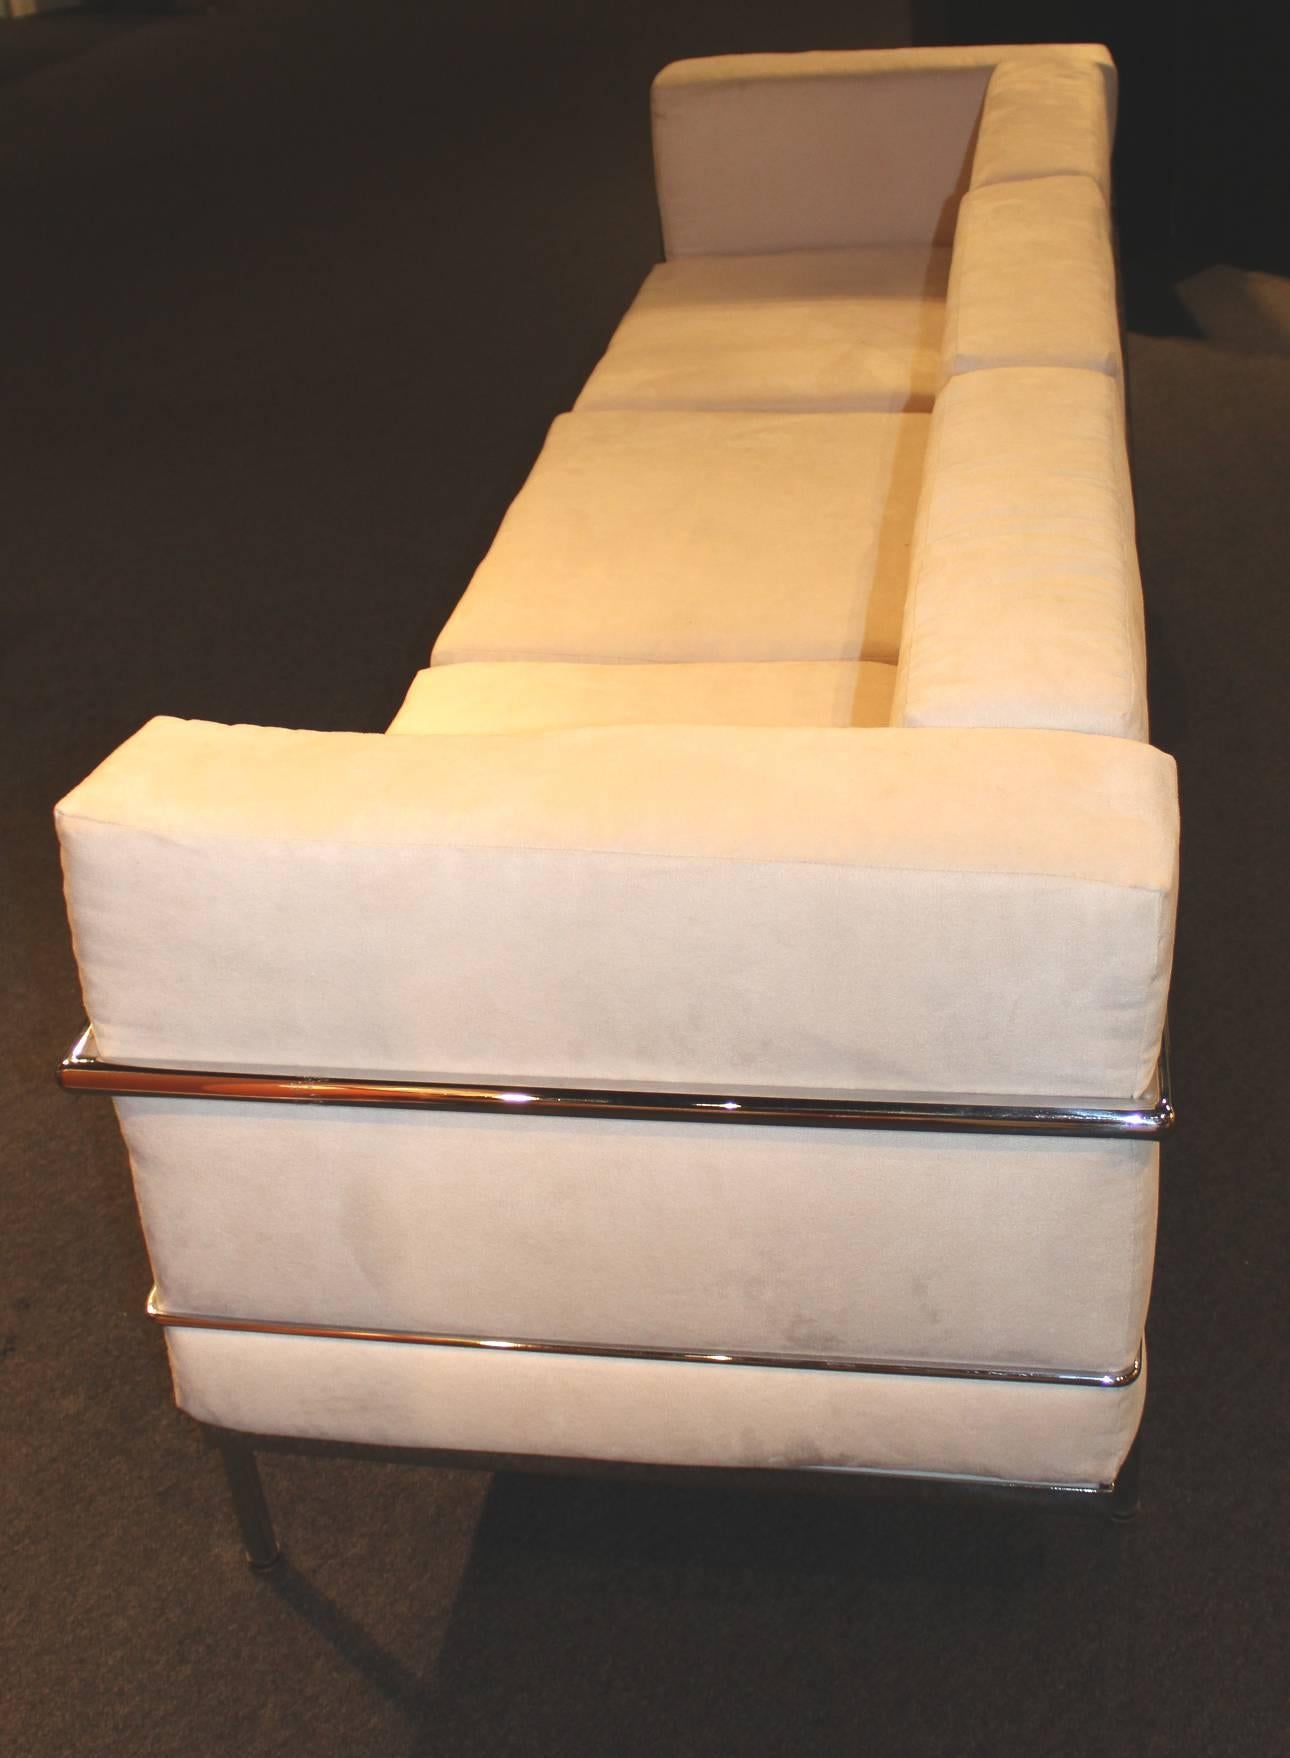 Le Corbusier LC3 Style Modern Triple-Seat Sofa in Suede and Chrome In Excellent Condition For Sale In Milford, NH